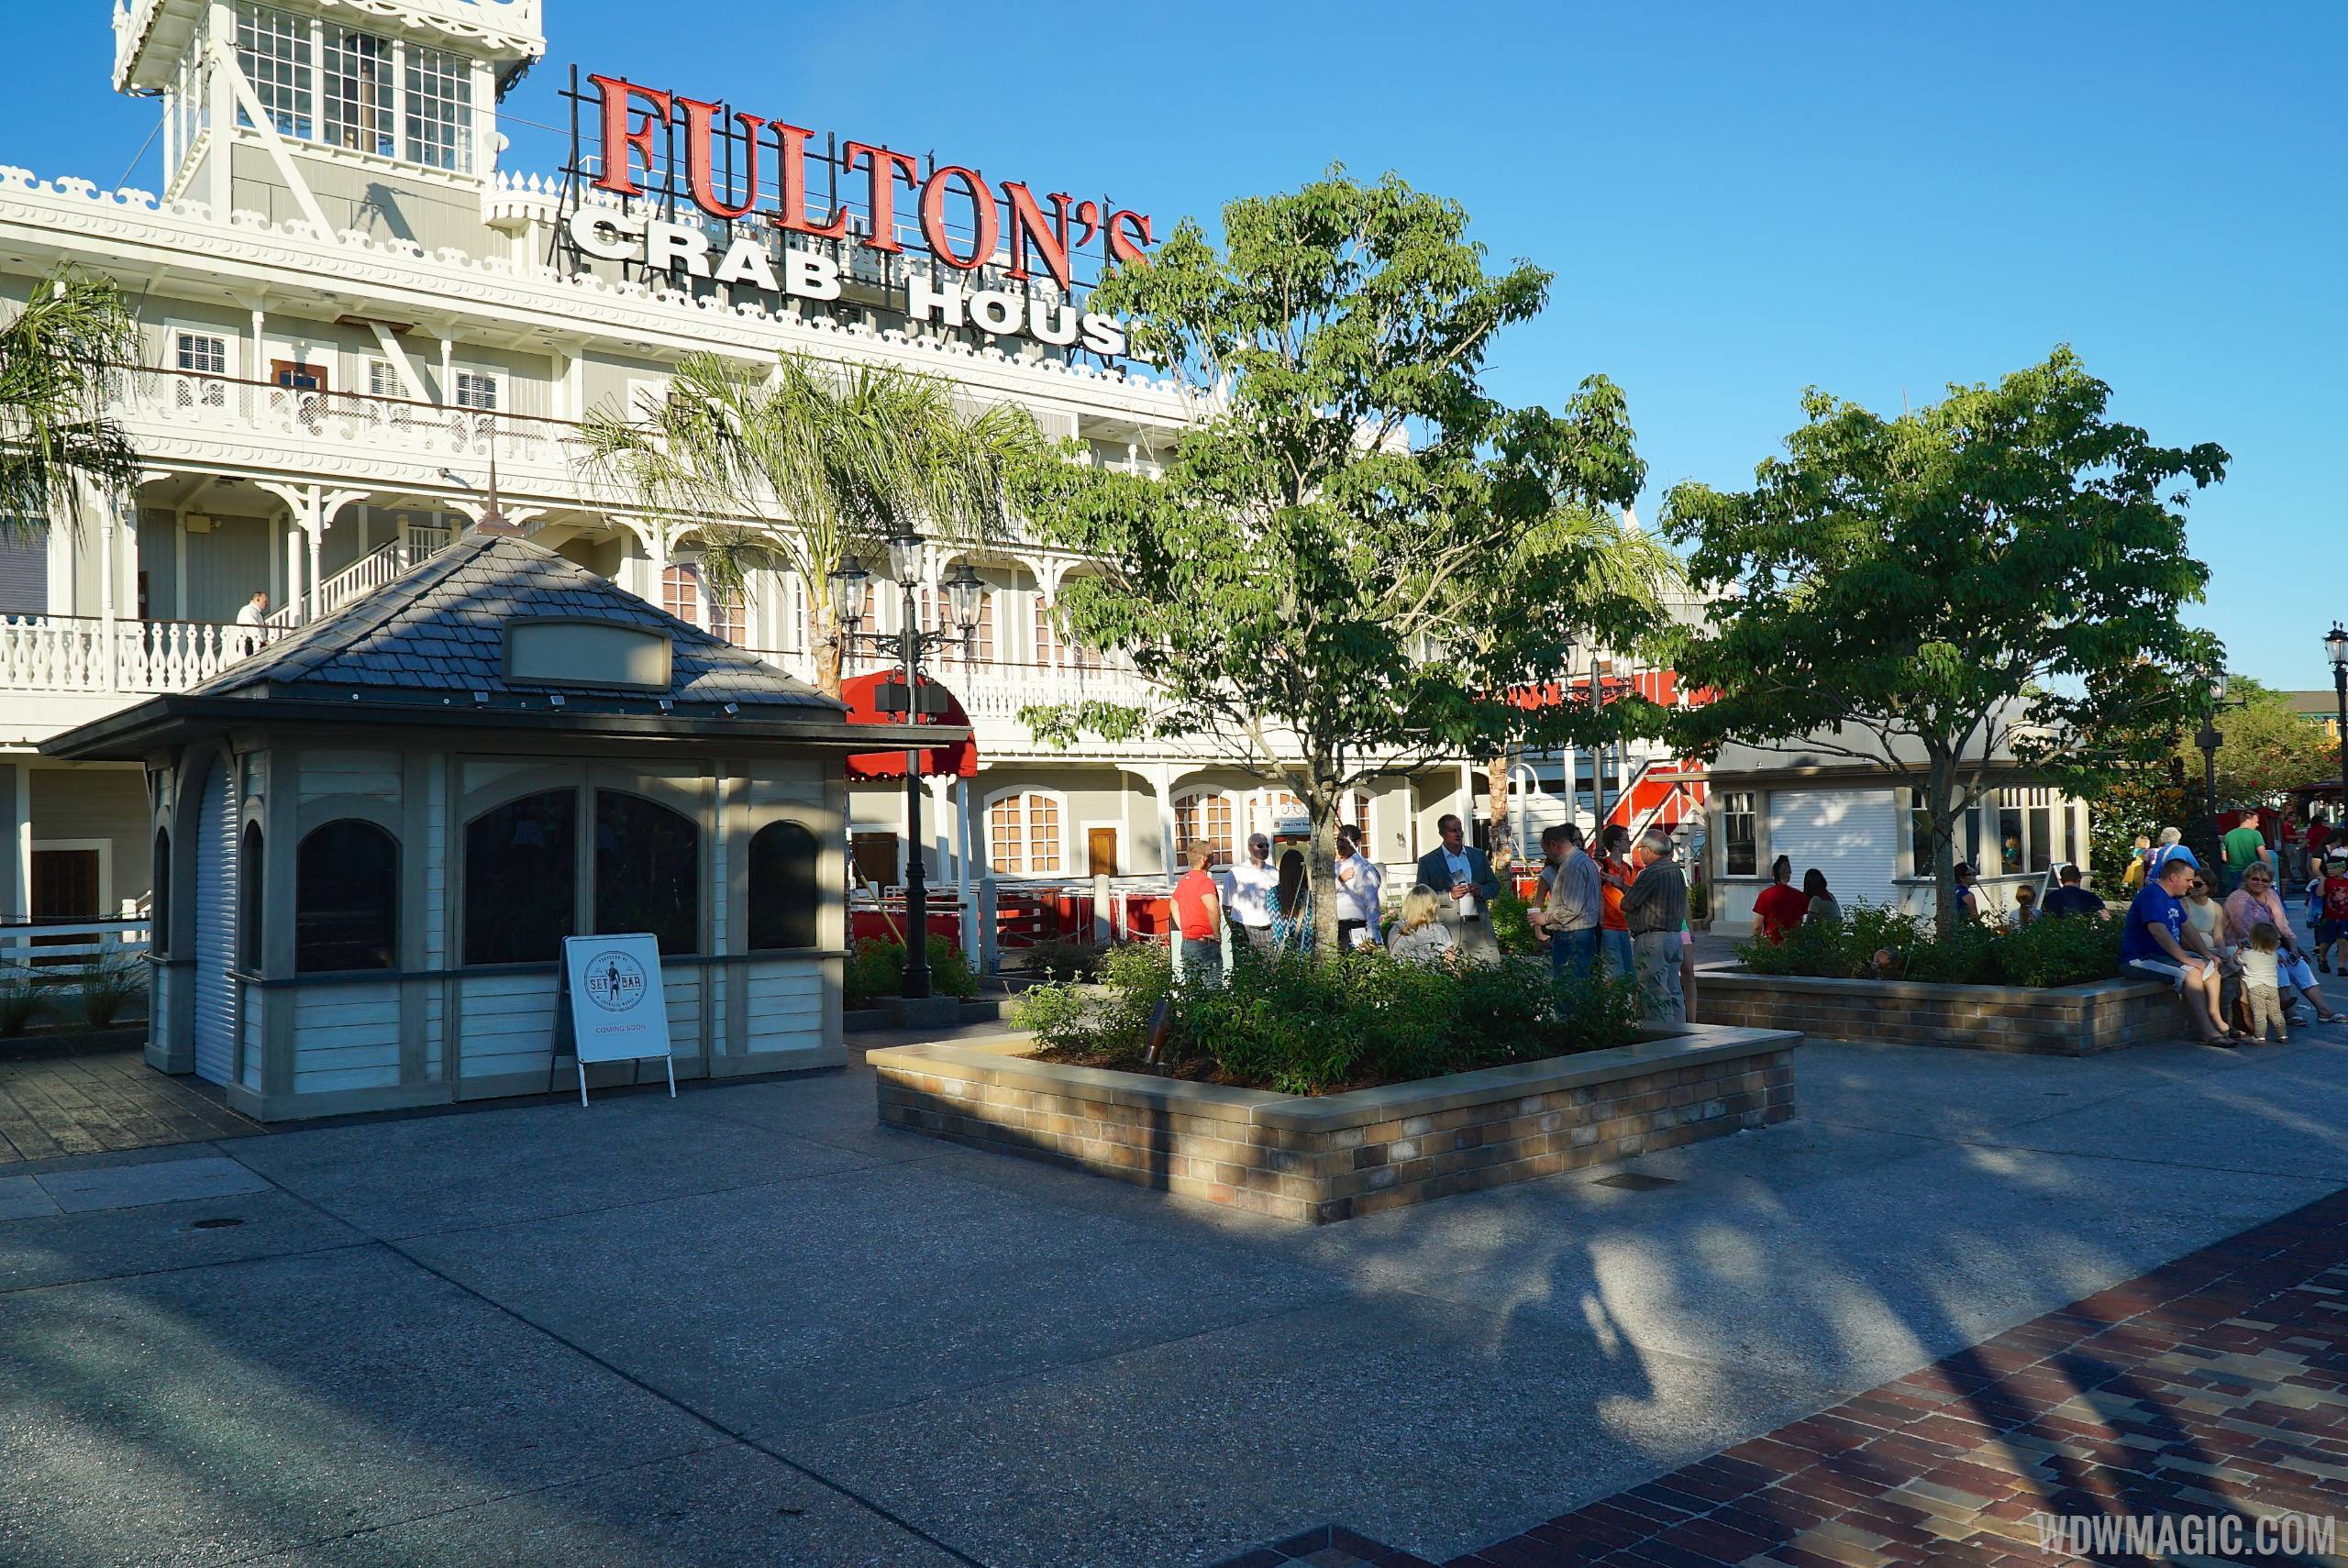 Two new kiosks coming to Downtown Disney - Set The Bar and Sublime